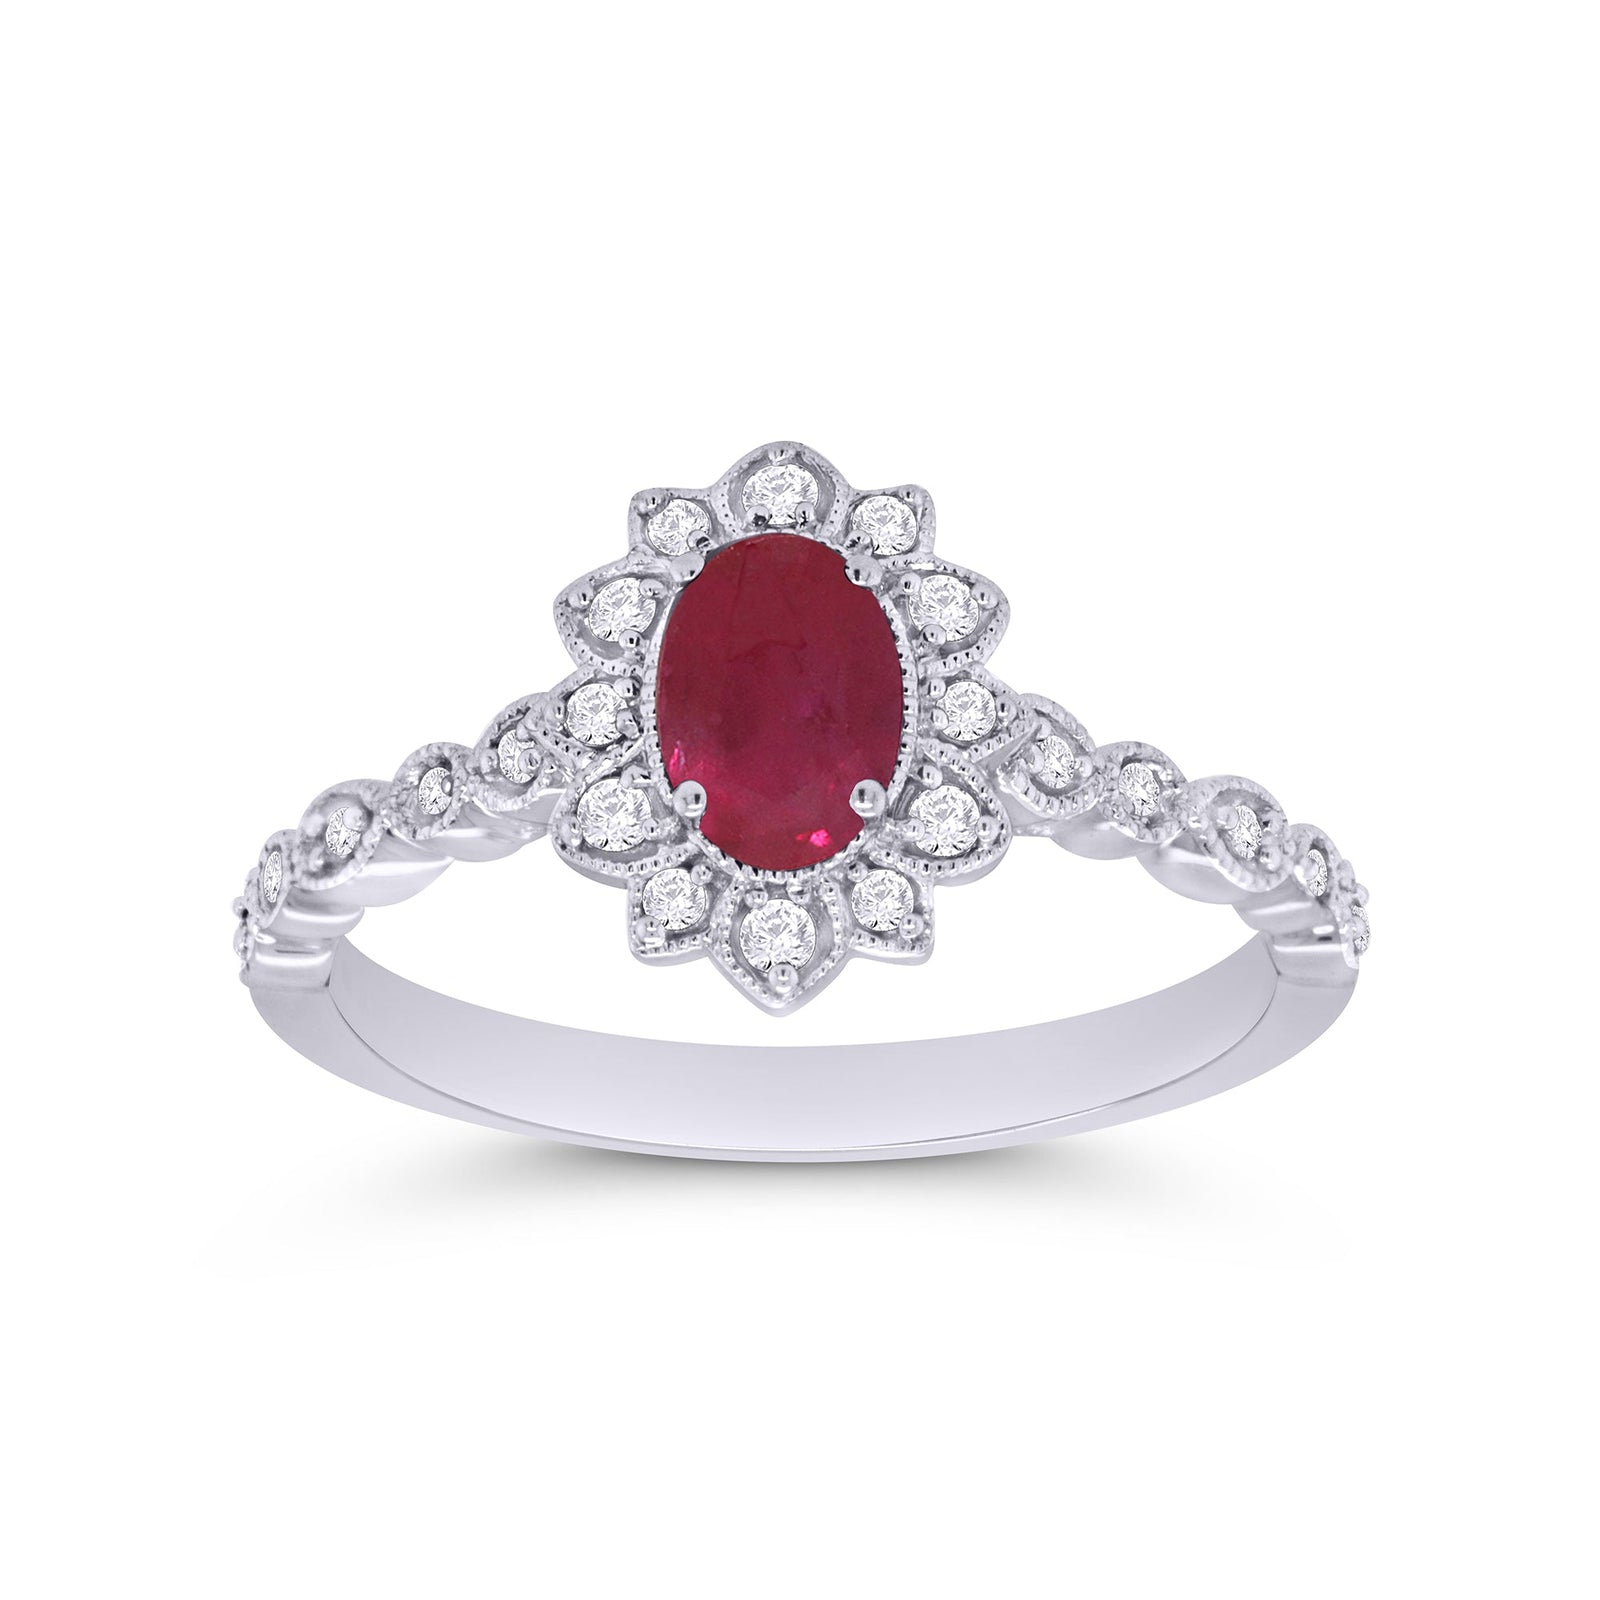 9ct white gold 6x4mm oval ruby & diamond cluster ring with diamond set shoulders 0.15ct